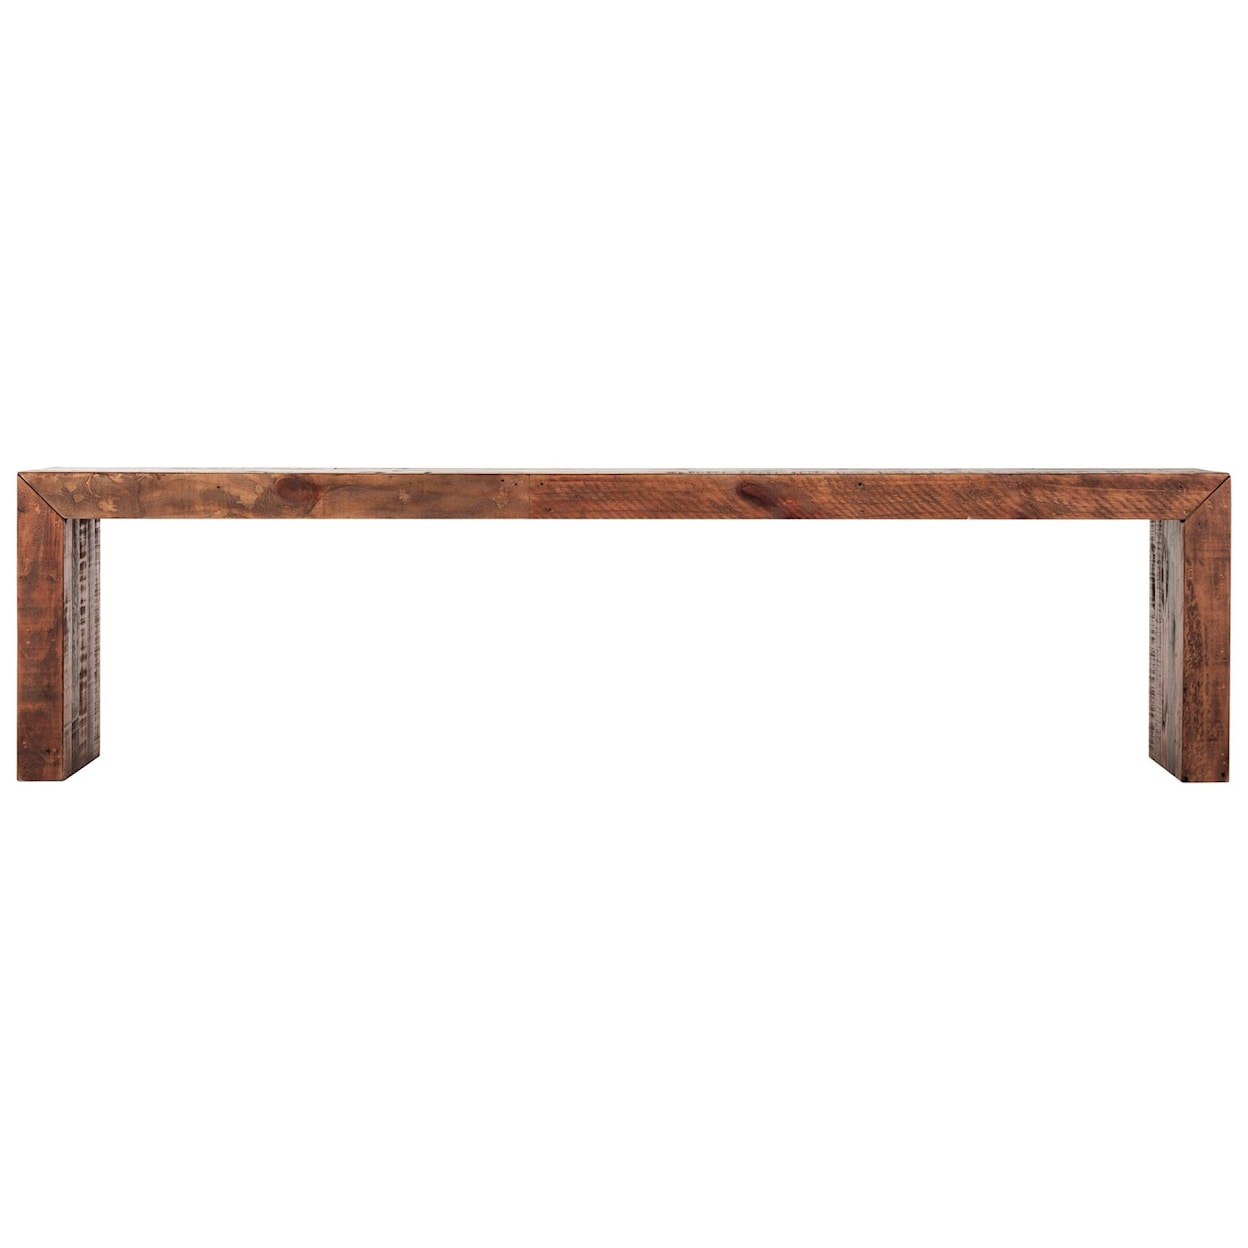 Moe's Home Collection Vintage Large Bench